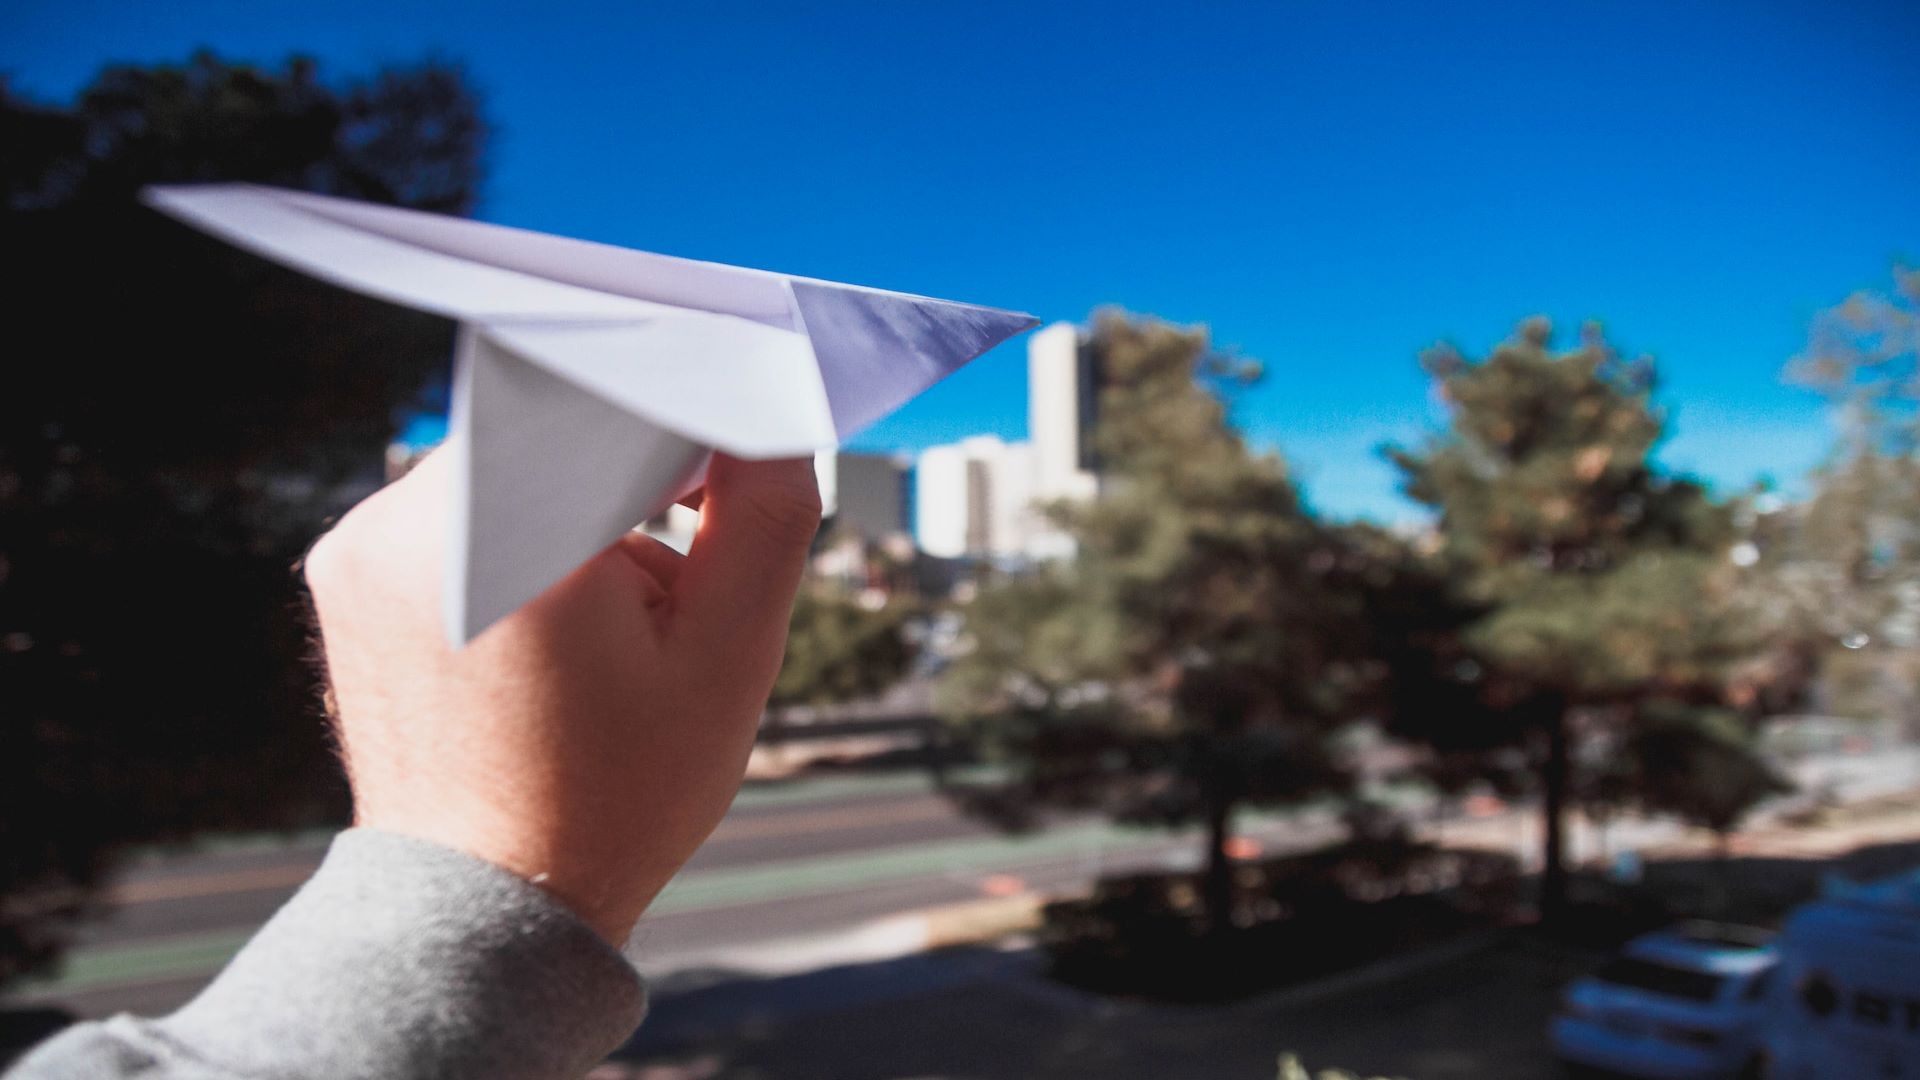 A hand holds a paper plane.